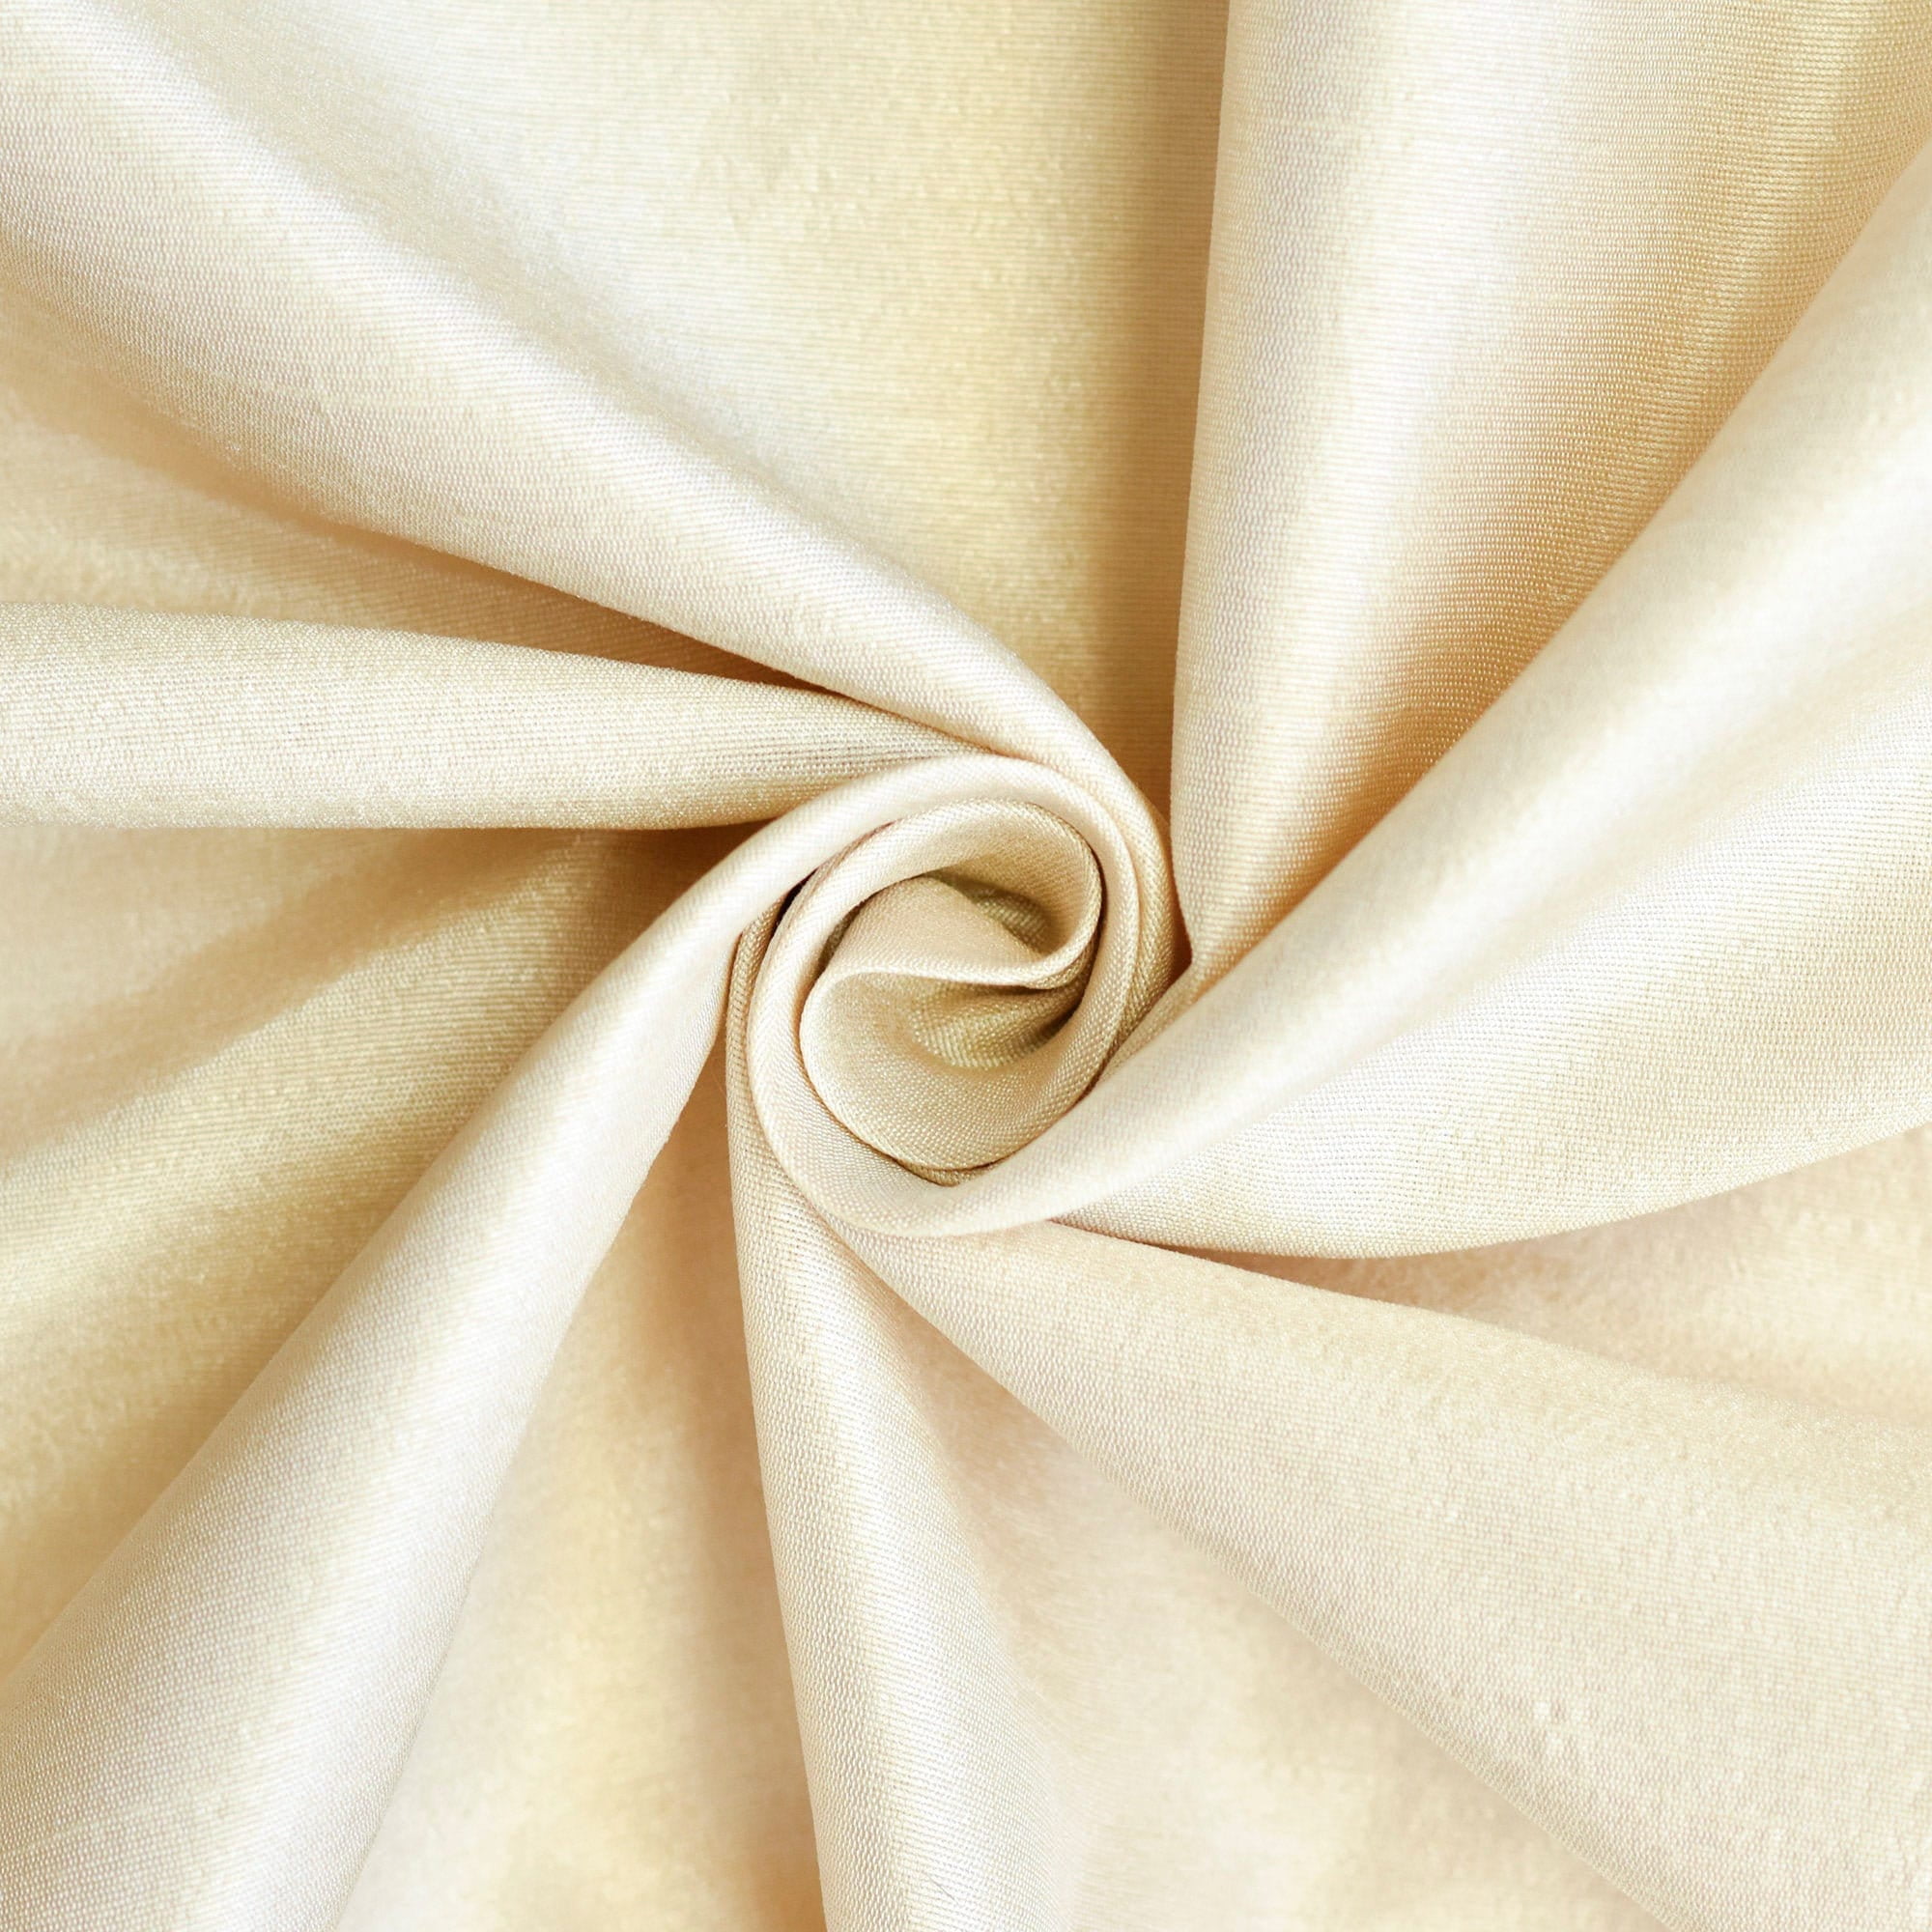 Cream 100% Pure Silk Fabric by the Yard, 41 Inch Pure Dupioni Silk Fabric,  Lustrous Slubbed Silk Fabric for Bridal Dresses, Curtains, Drapes 